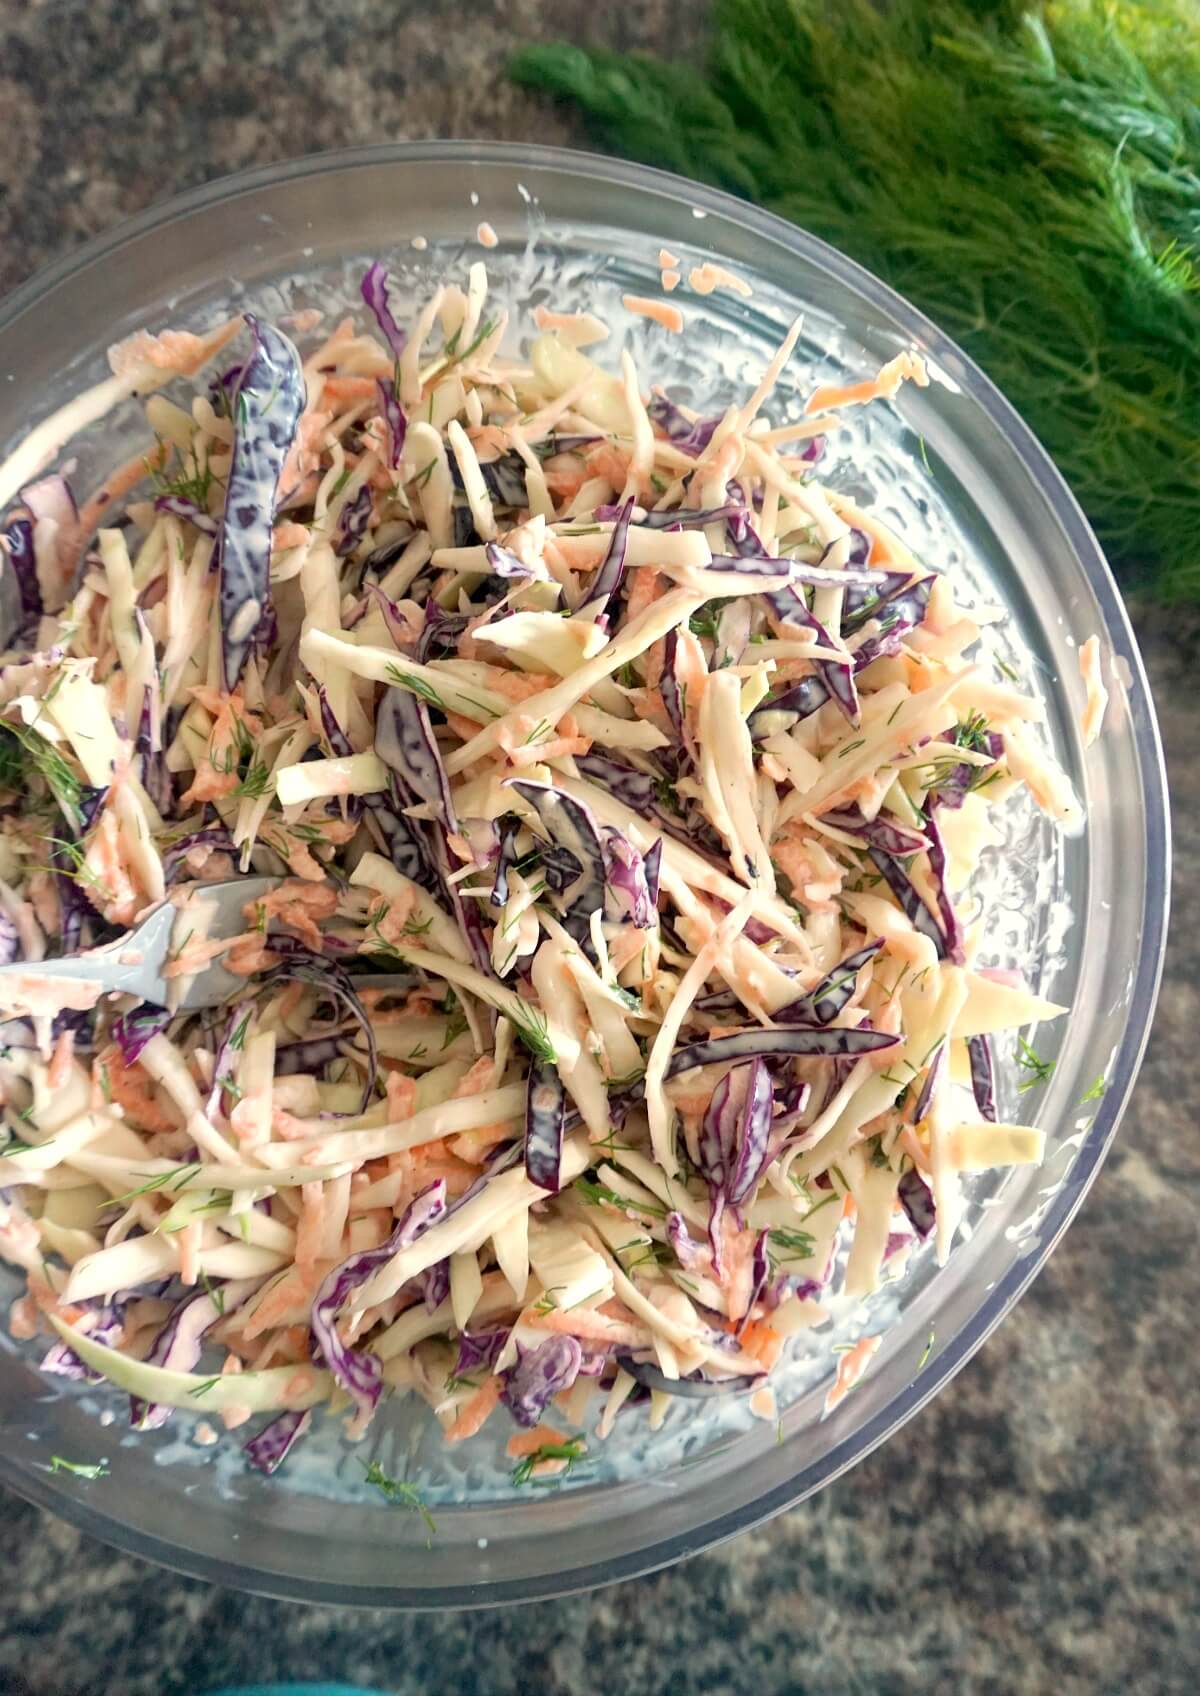 Overhead shot of a bowl with coleslaw